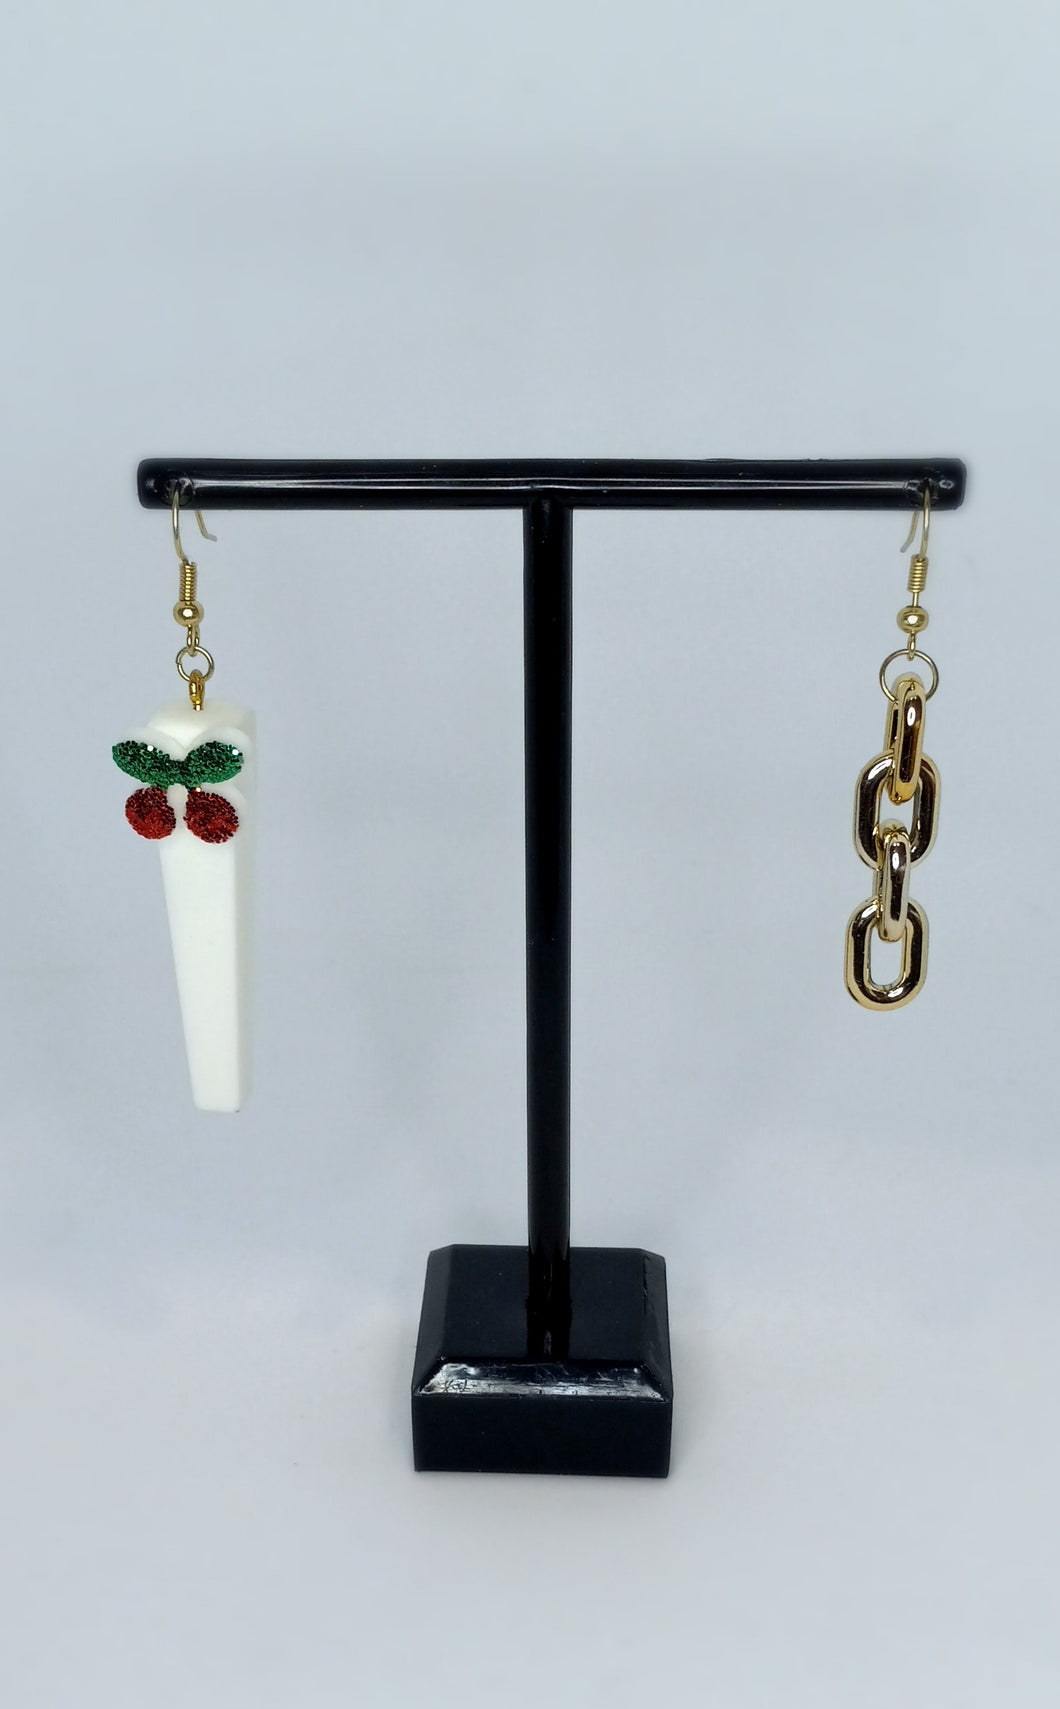 Cherry and Gold Links - Mix Match Earrings